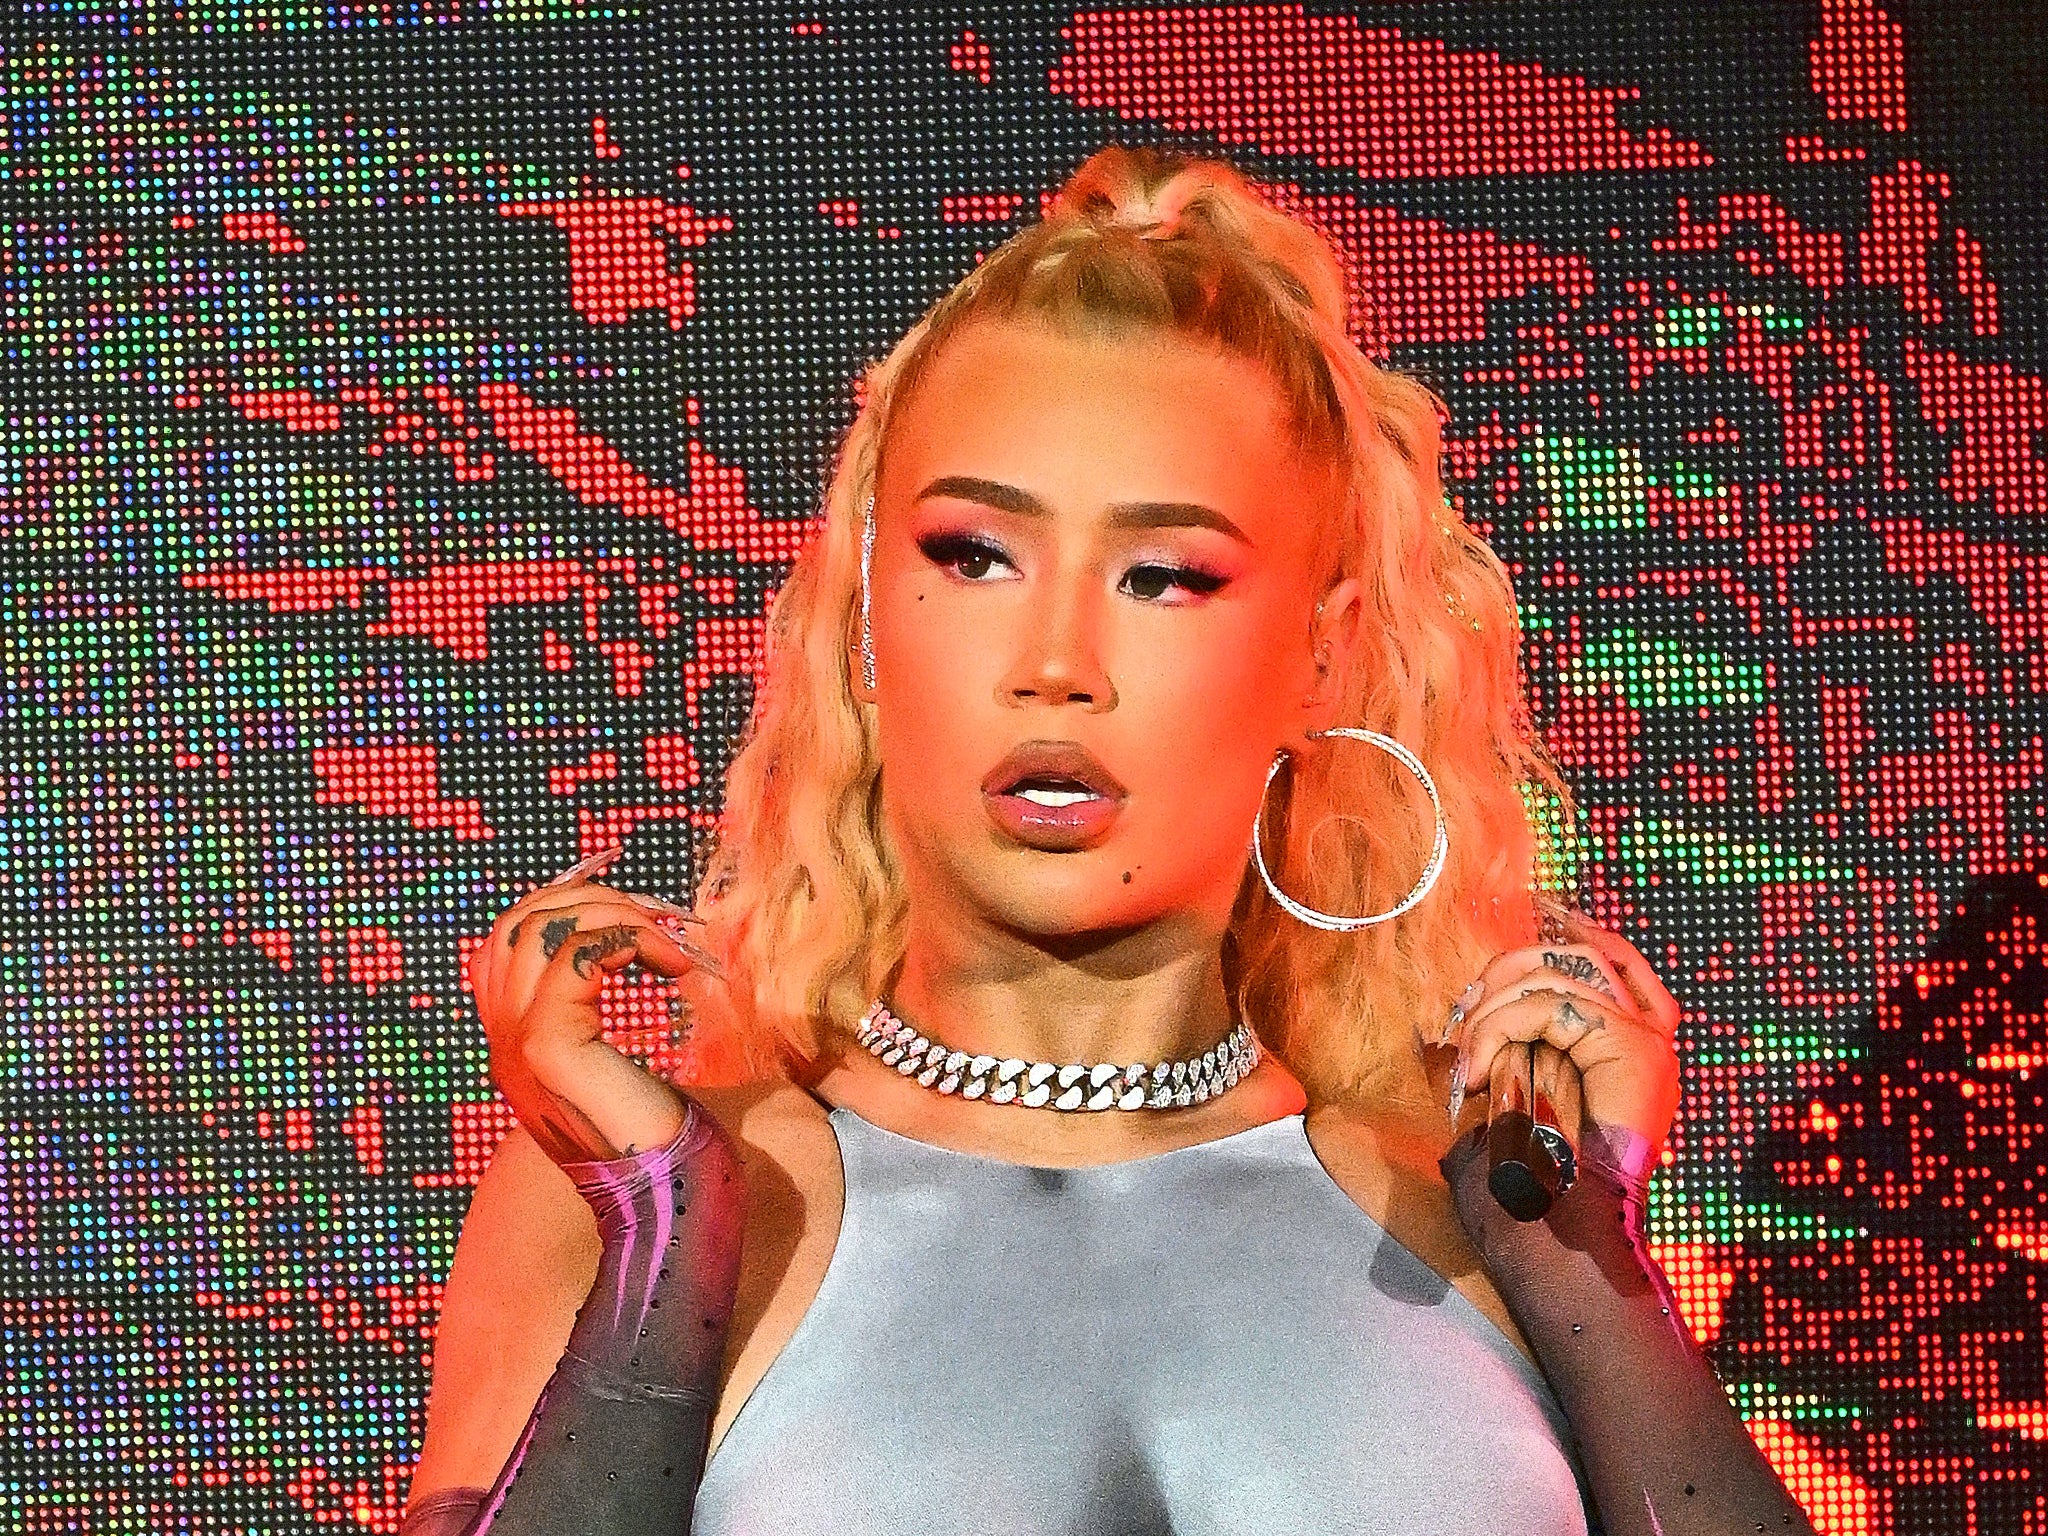 2016 Iggy Azalea Nude Porn - Iggy Azalea: OnlyFans has been a home for safe sex work. Will celebrities  ruin it? | The Independent